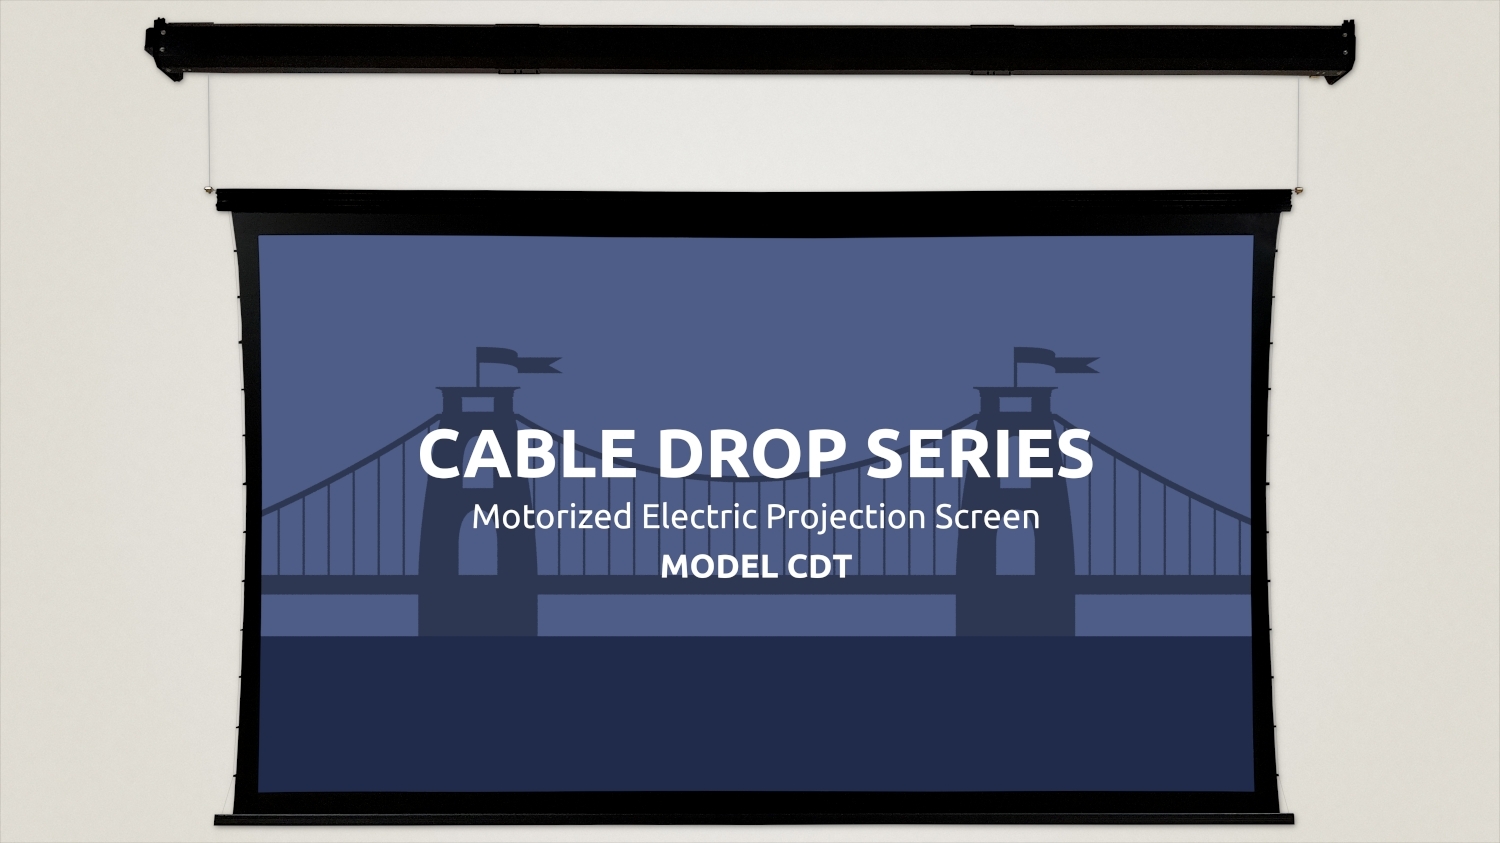 Cable Drop Series